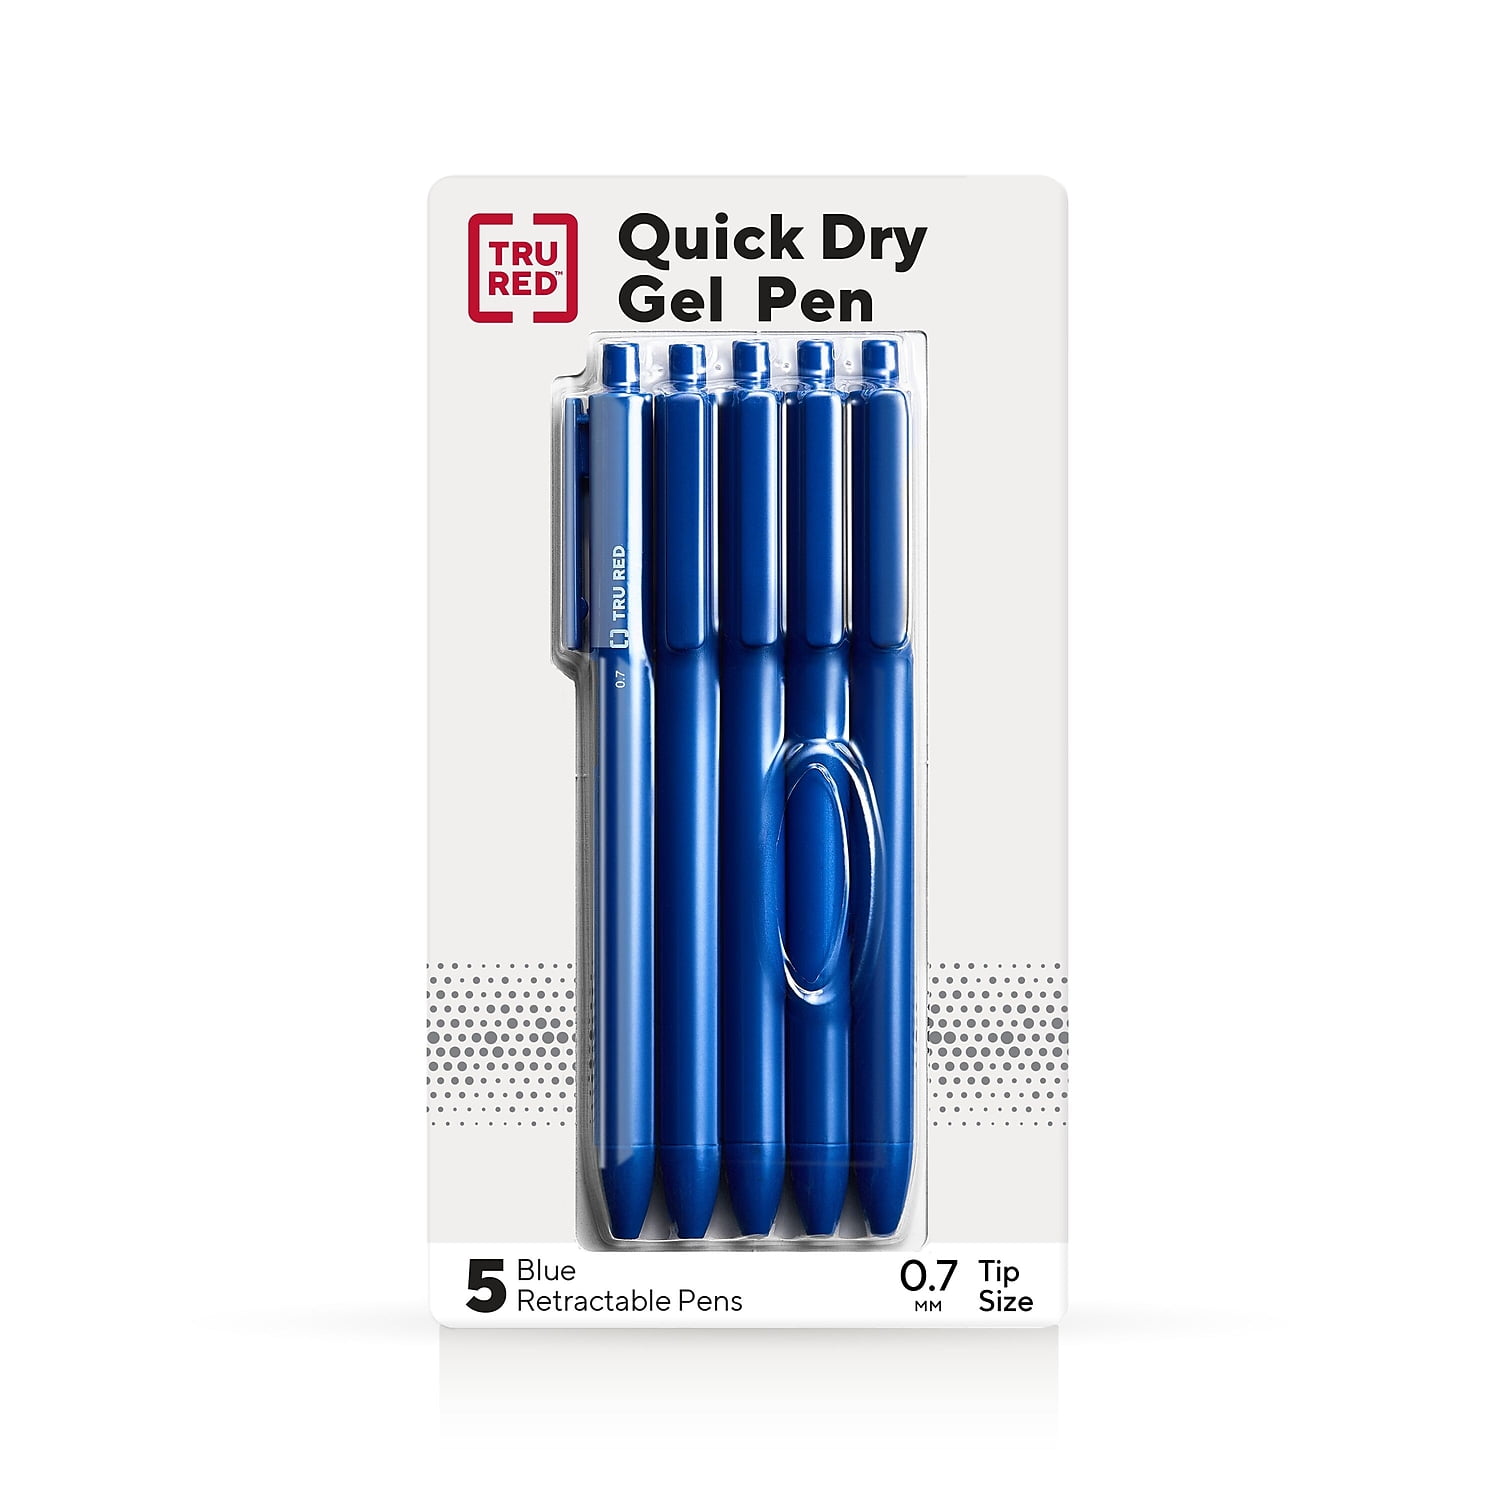 Jumbo Tot Pencil Round 10mm Metallic Blue and Red Med Soft Core (Package of 12)